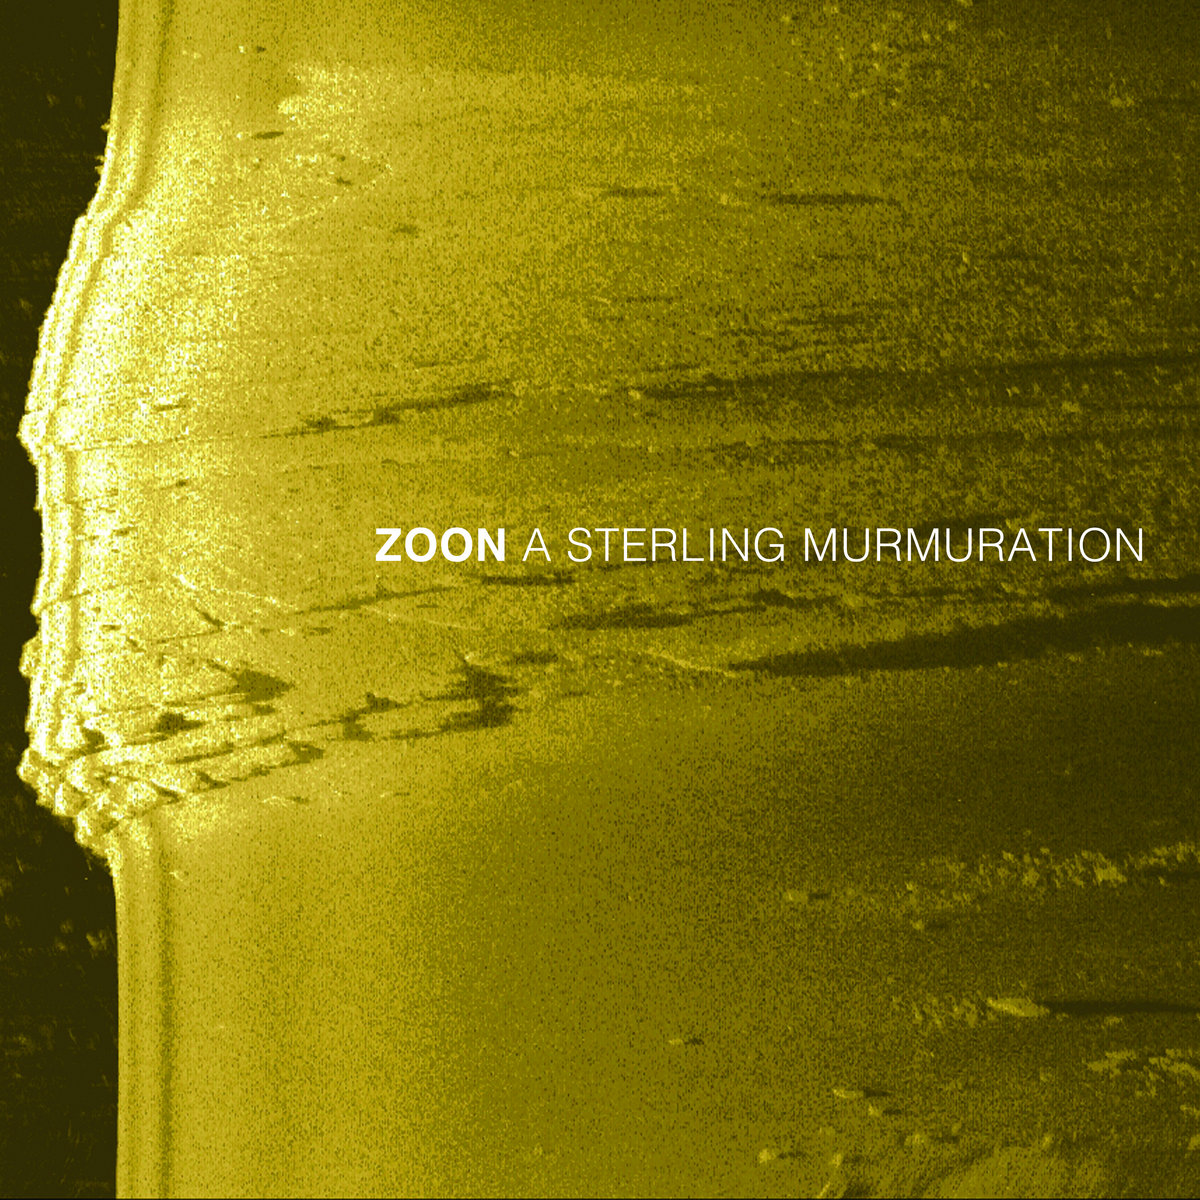 artwork for A Sterling Murmuration, the new EP from Zoon, featuring a yellow landscape